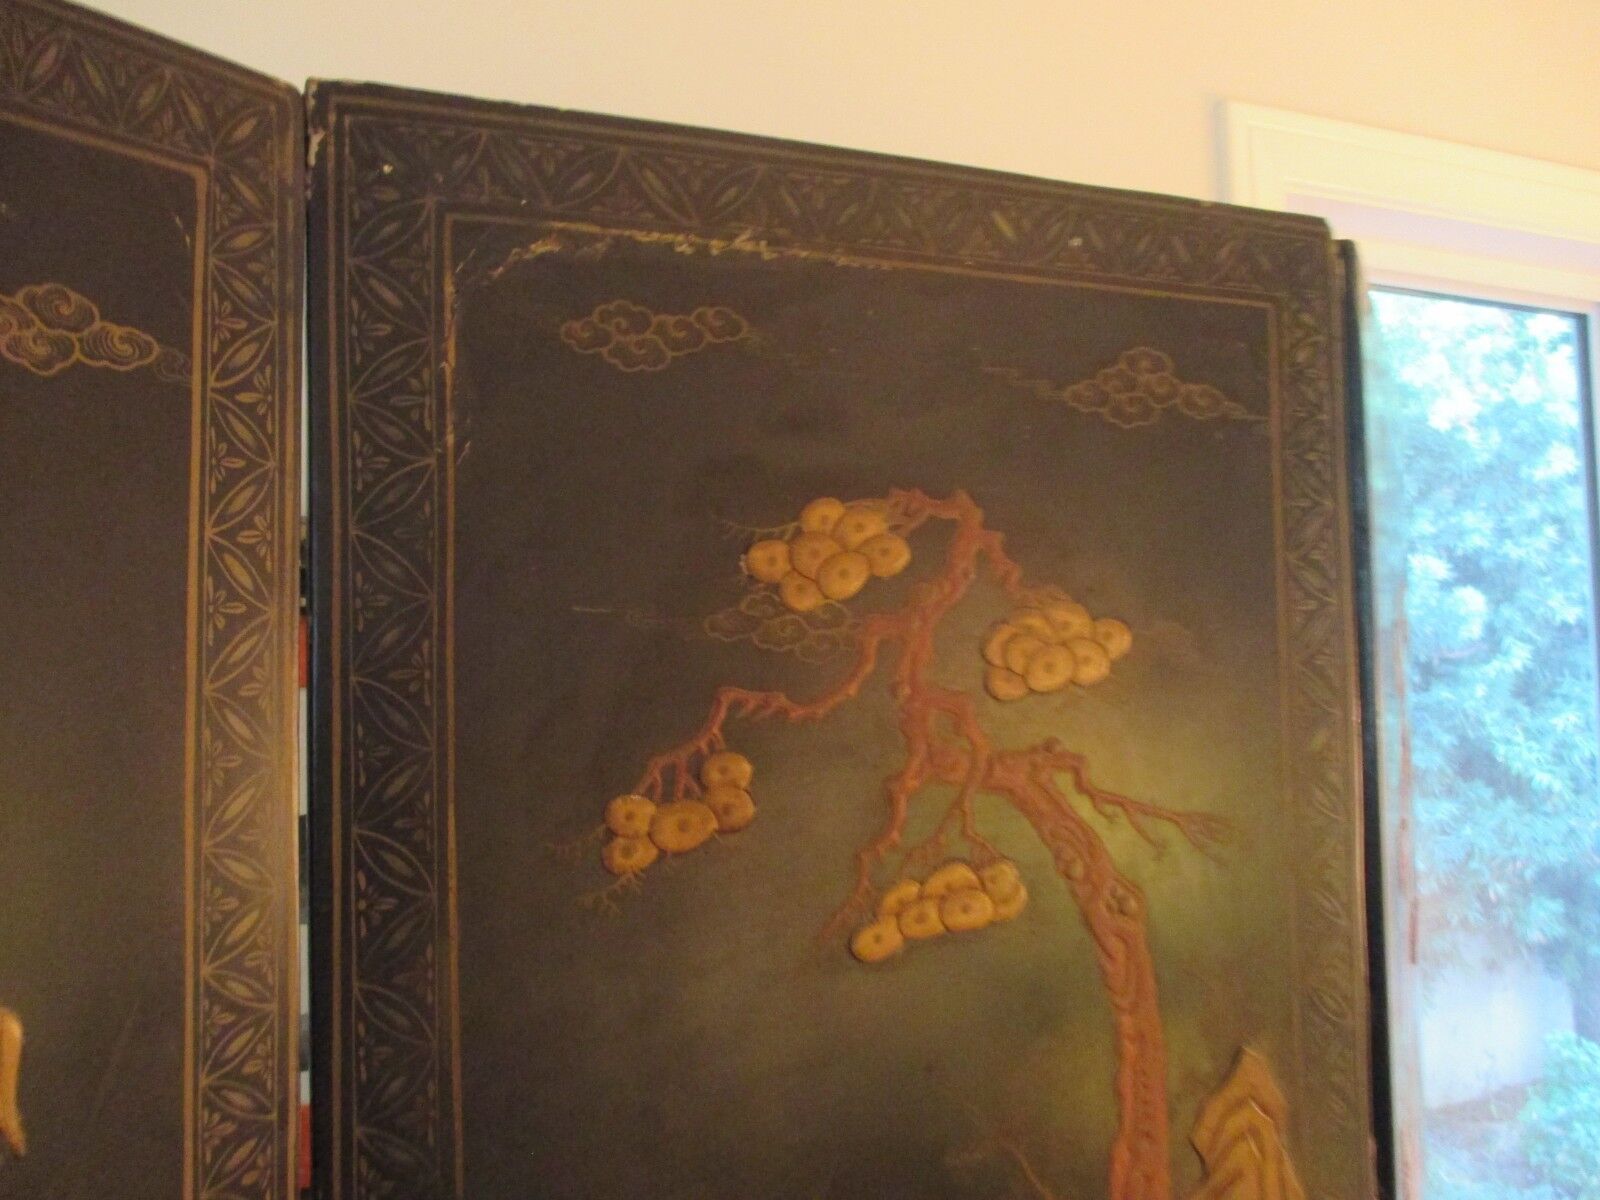 ANTIQUE CHINESE BLACK LACQUER SCREEN Mother of Pearl-EXQUISITE! RARE19th C. Без бренда - фотография #5